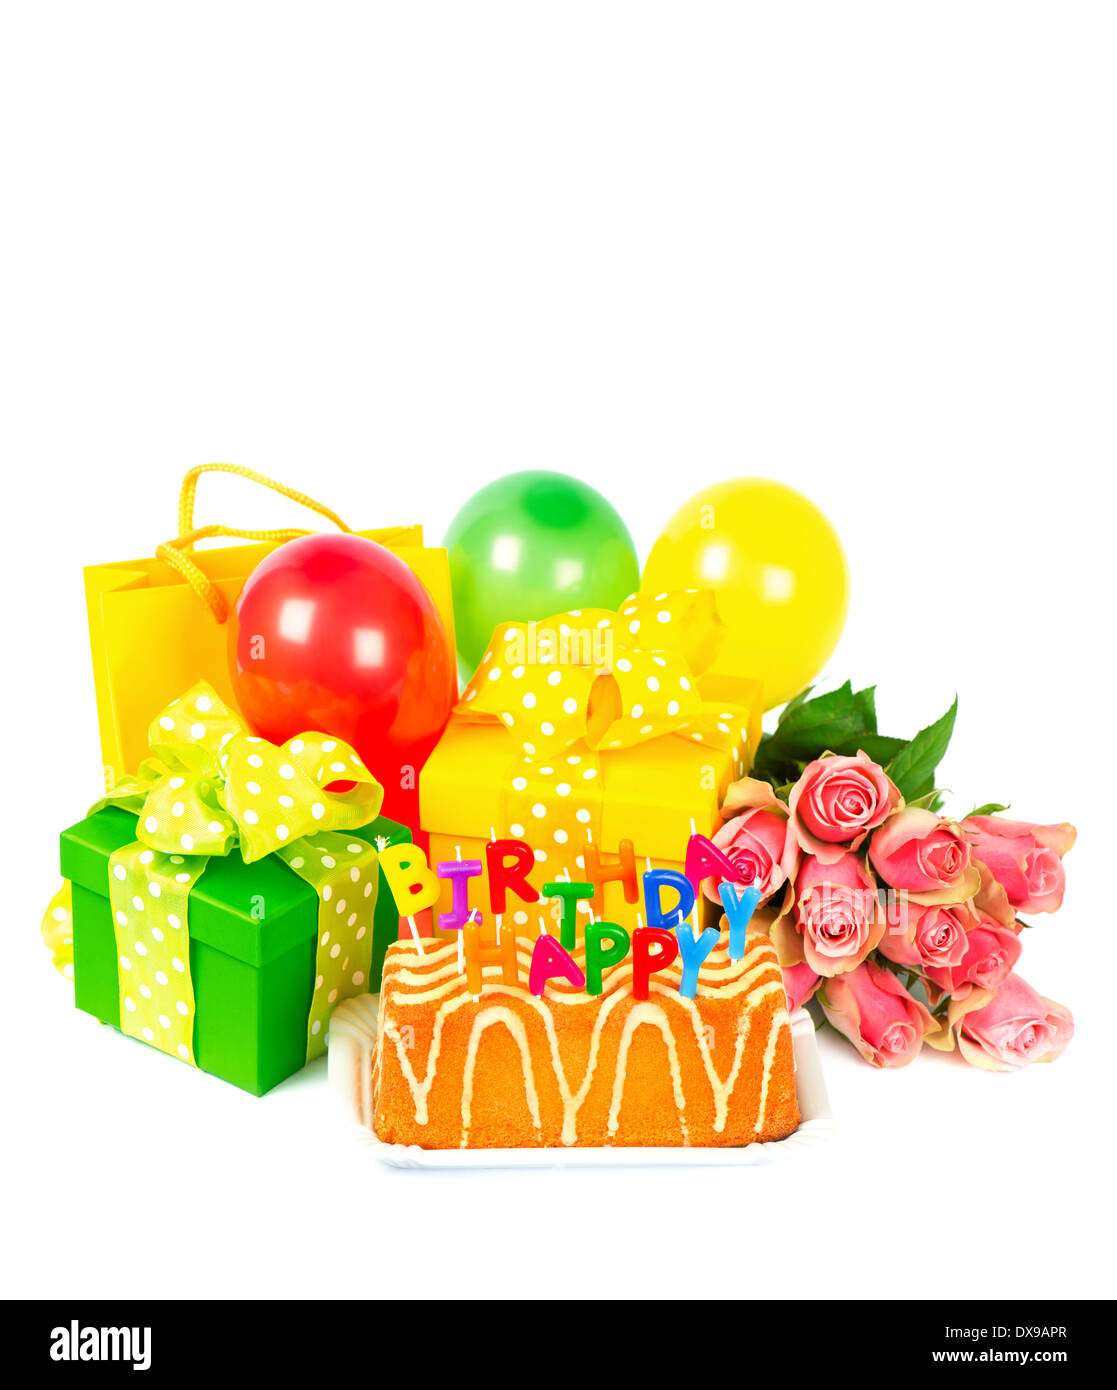 colorful birthday decoration with cake, candles, gifts, air balloons and rose flowers. card concept Stock Photo